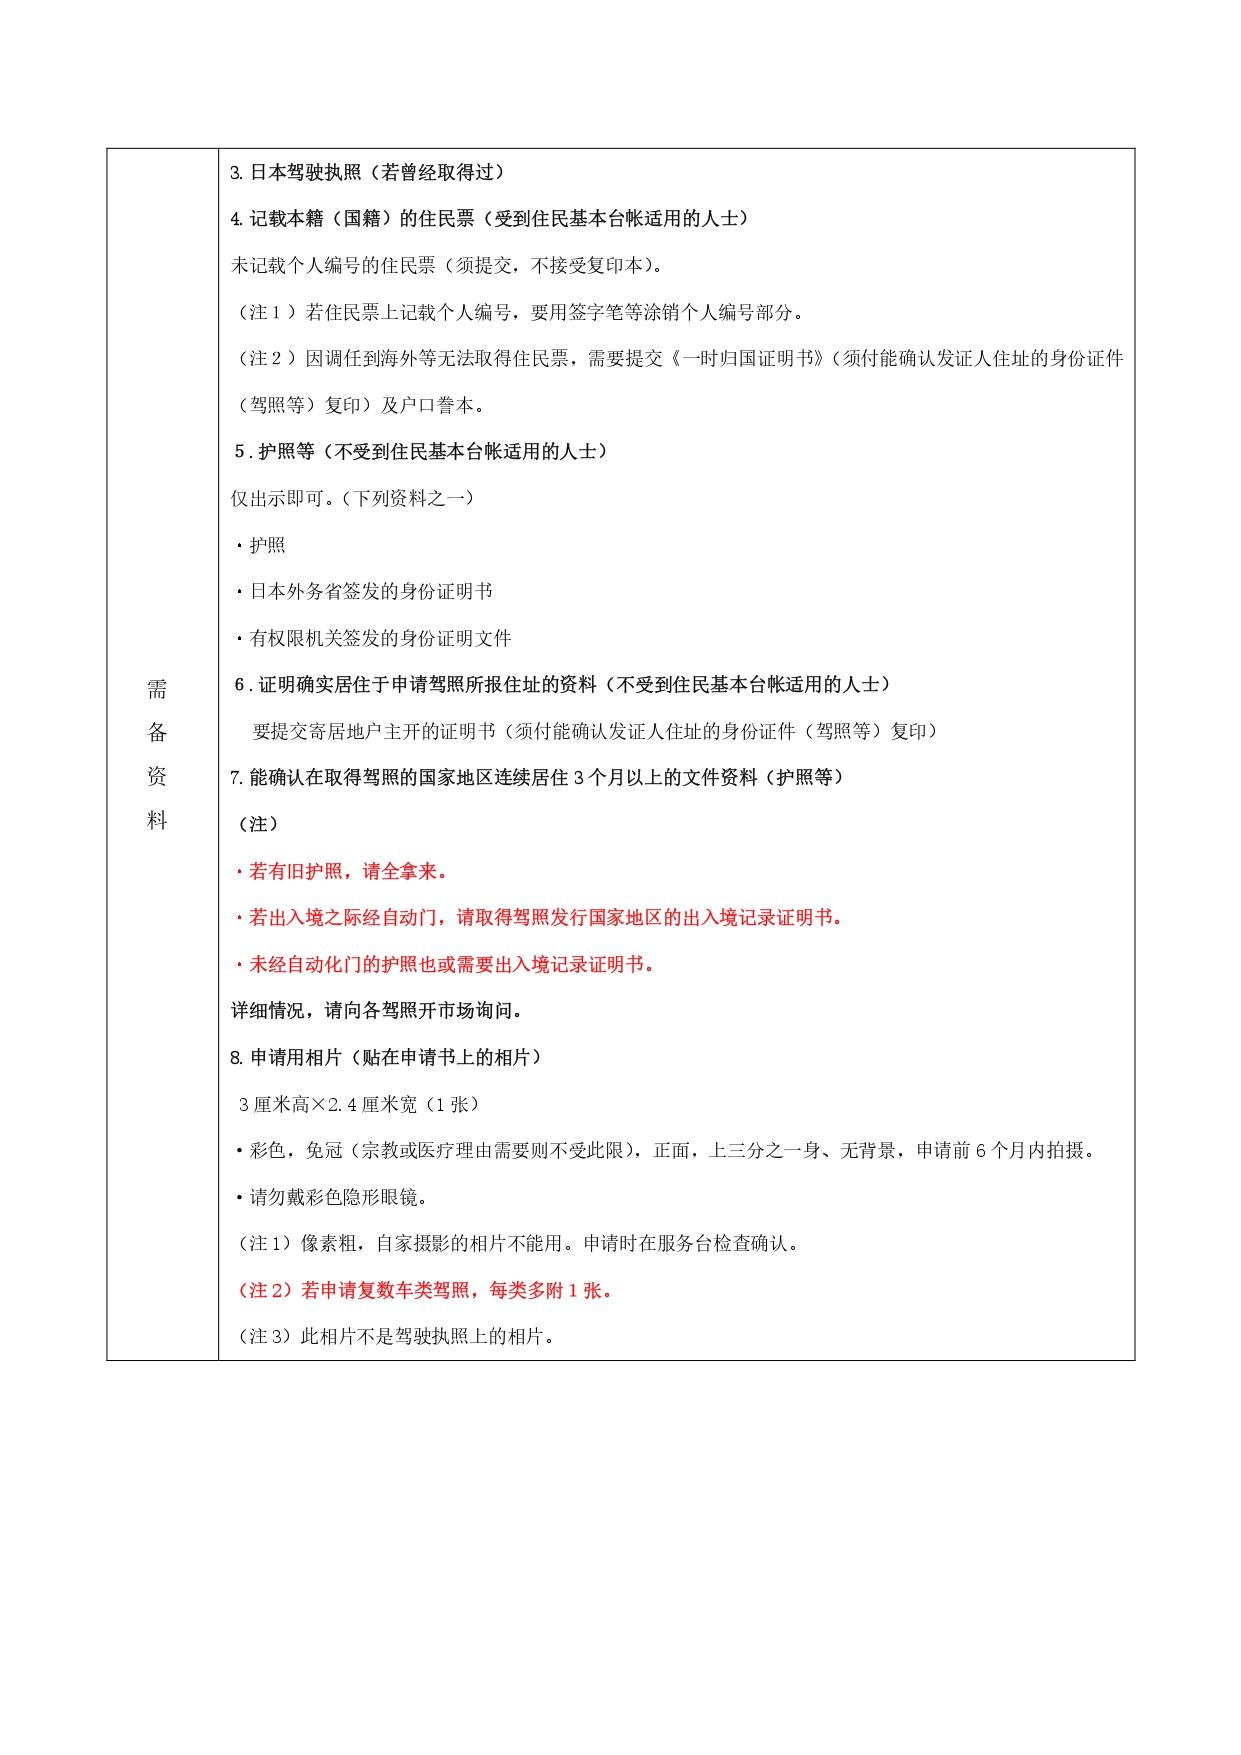 convert_license_chinese_page-0002.jpg